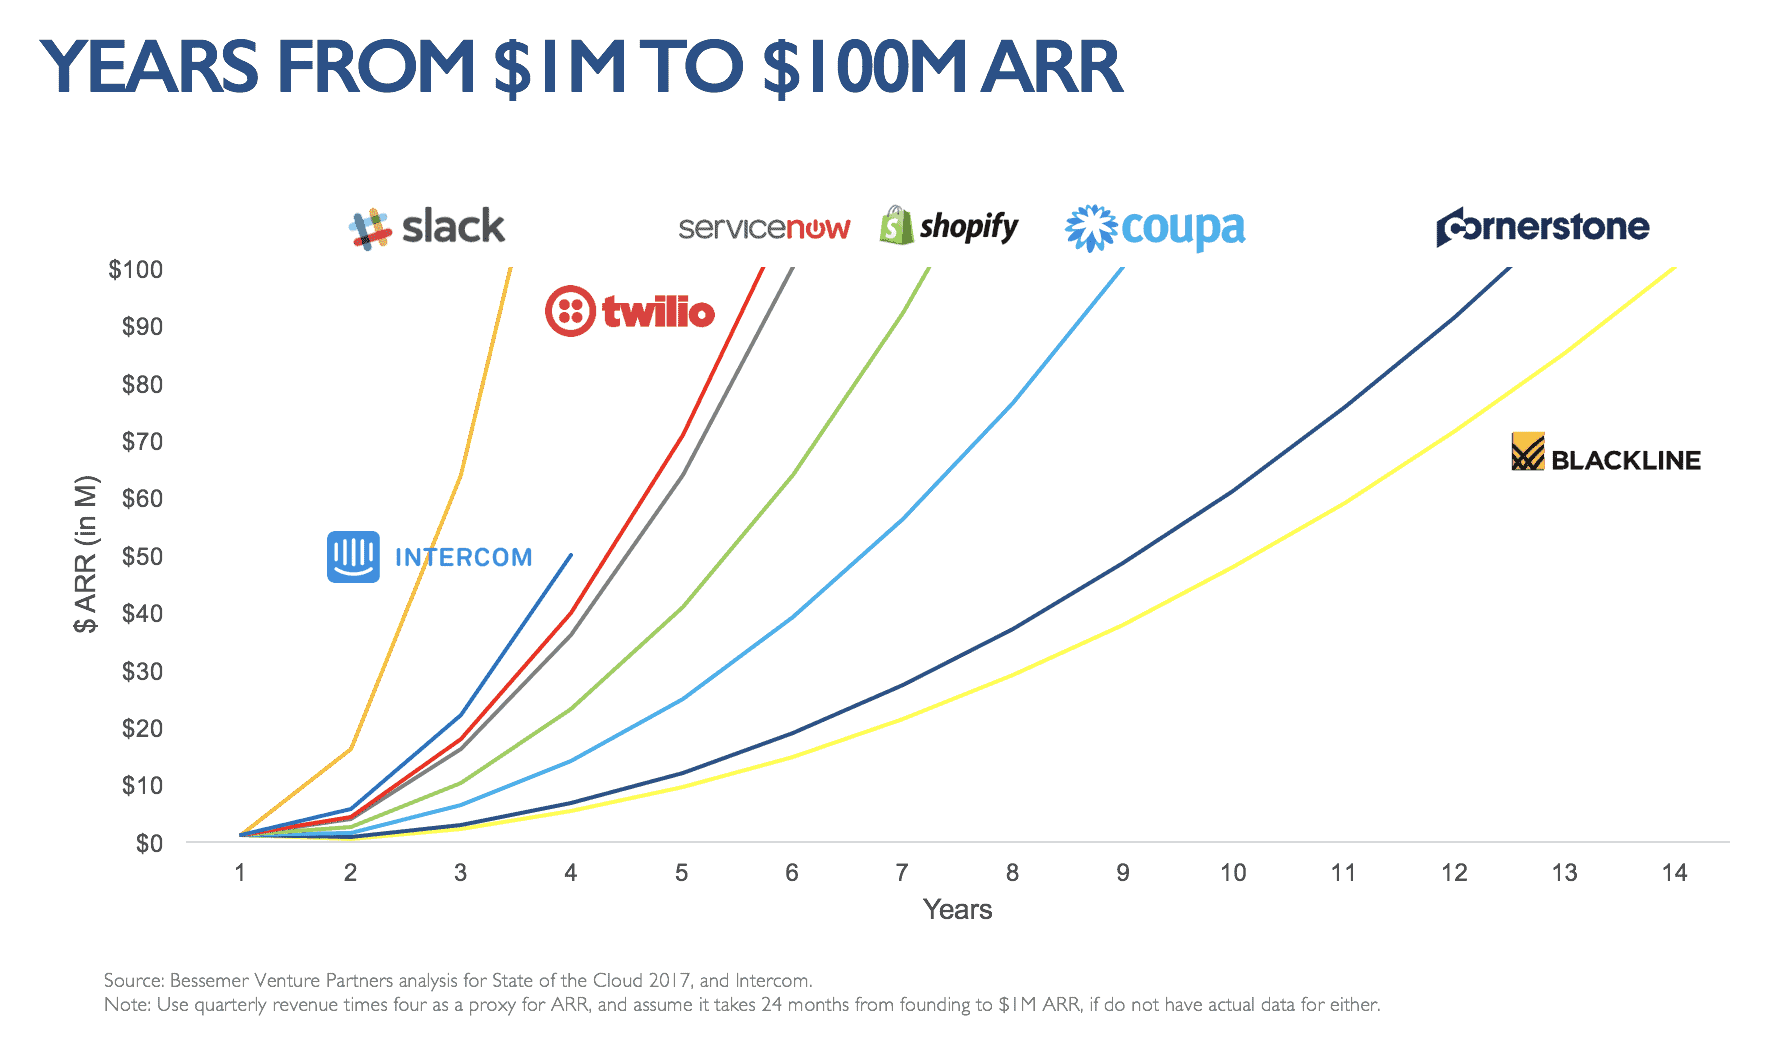 Graph of how long various SaaS companies took to go from $1M to $100M in ARR